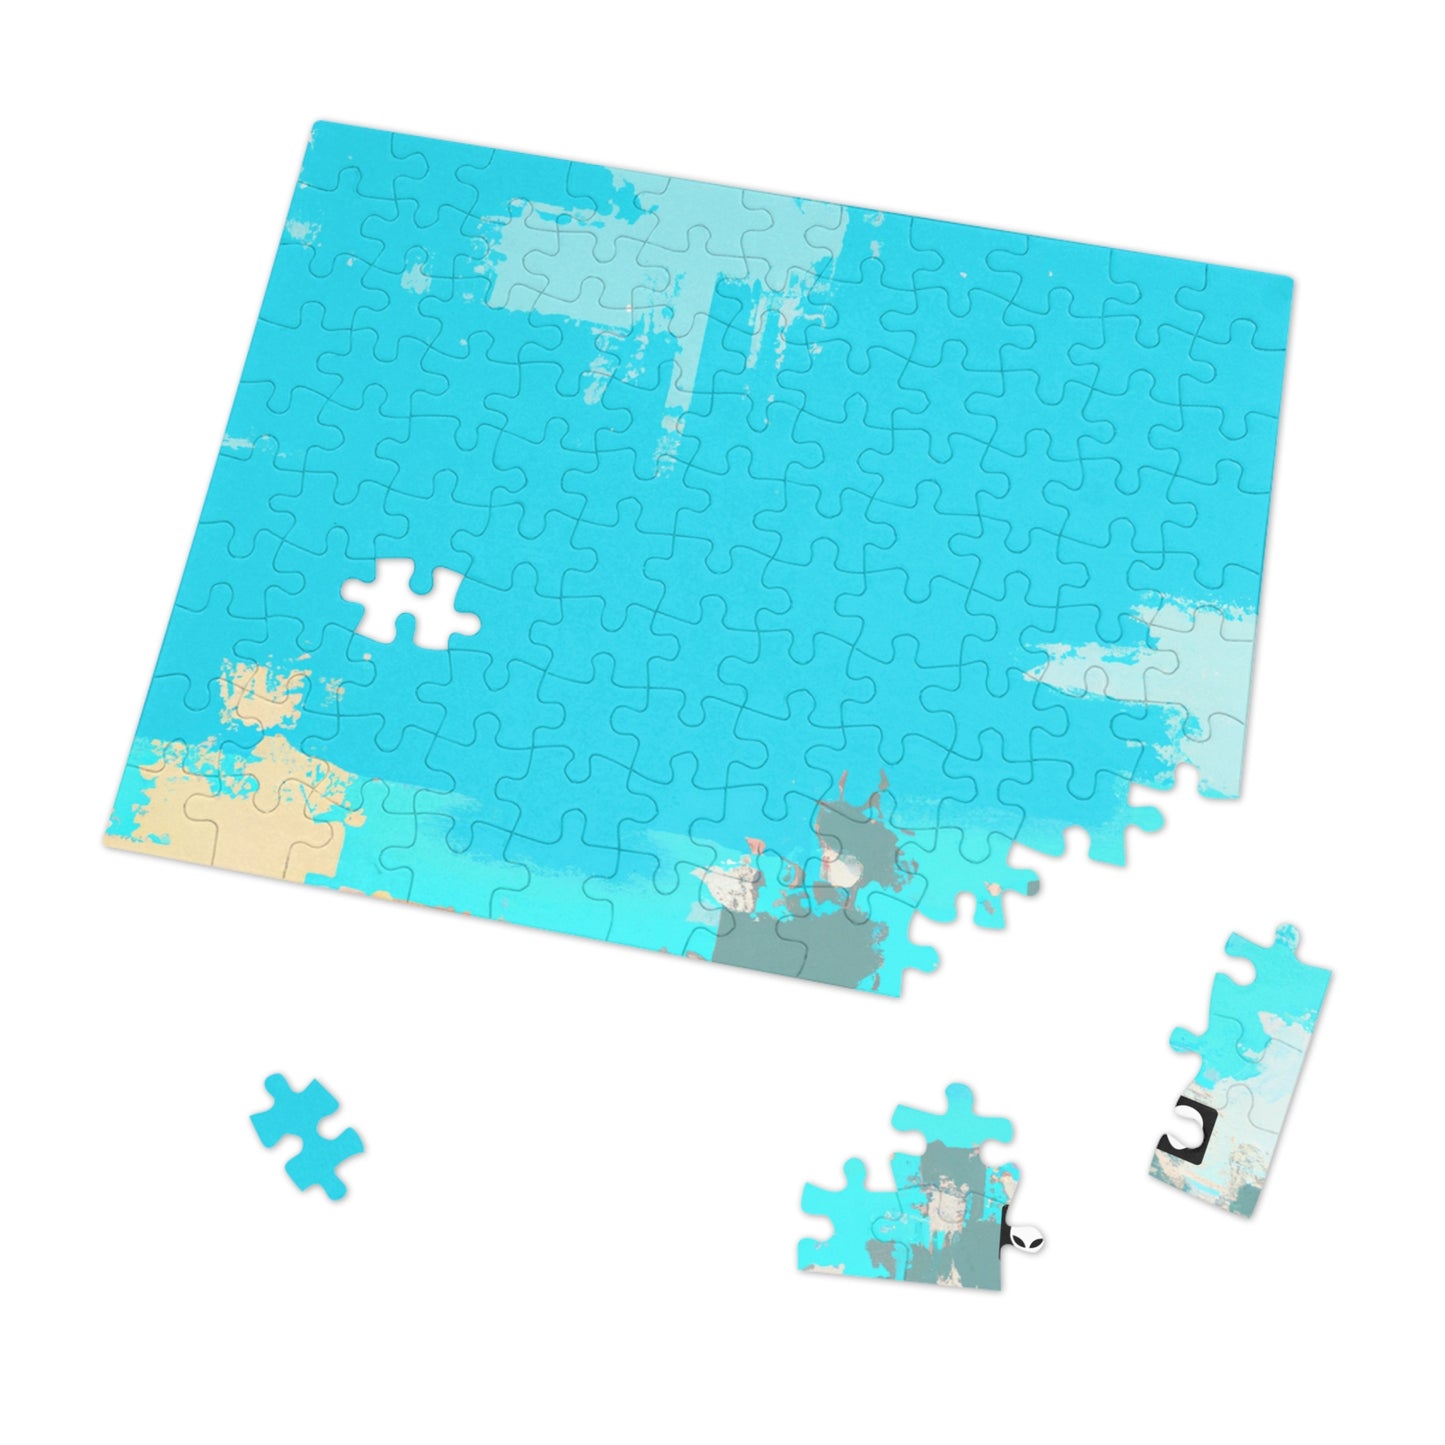 "A Breezy Skyscape: A Combination of Tradition and Modernity" - The Alien Jigsaw Puzzle